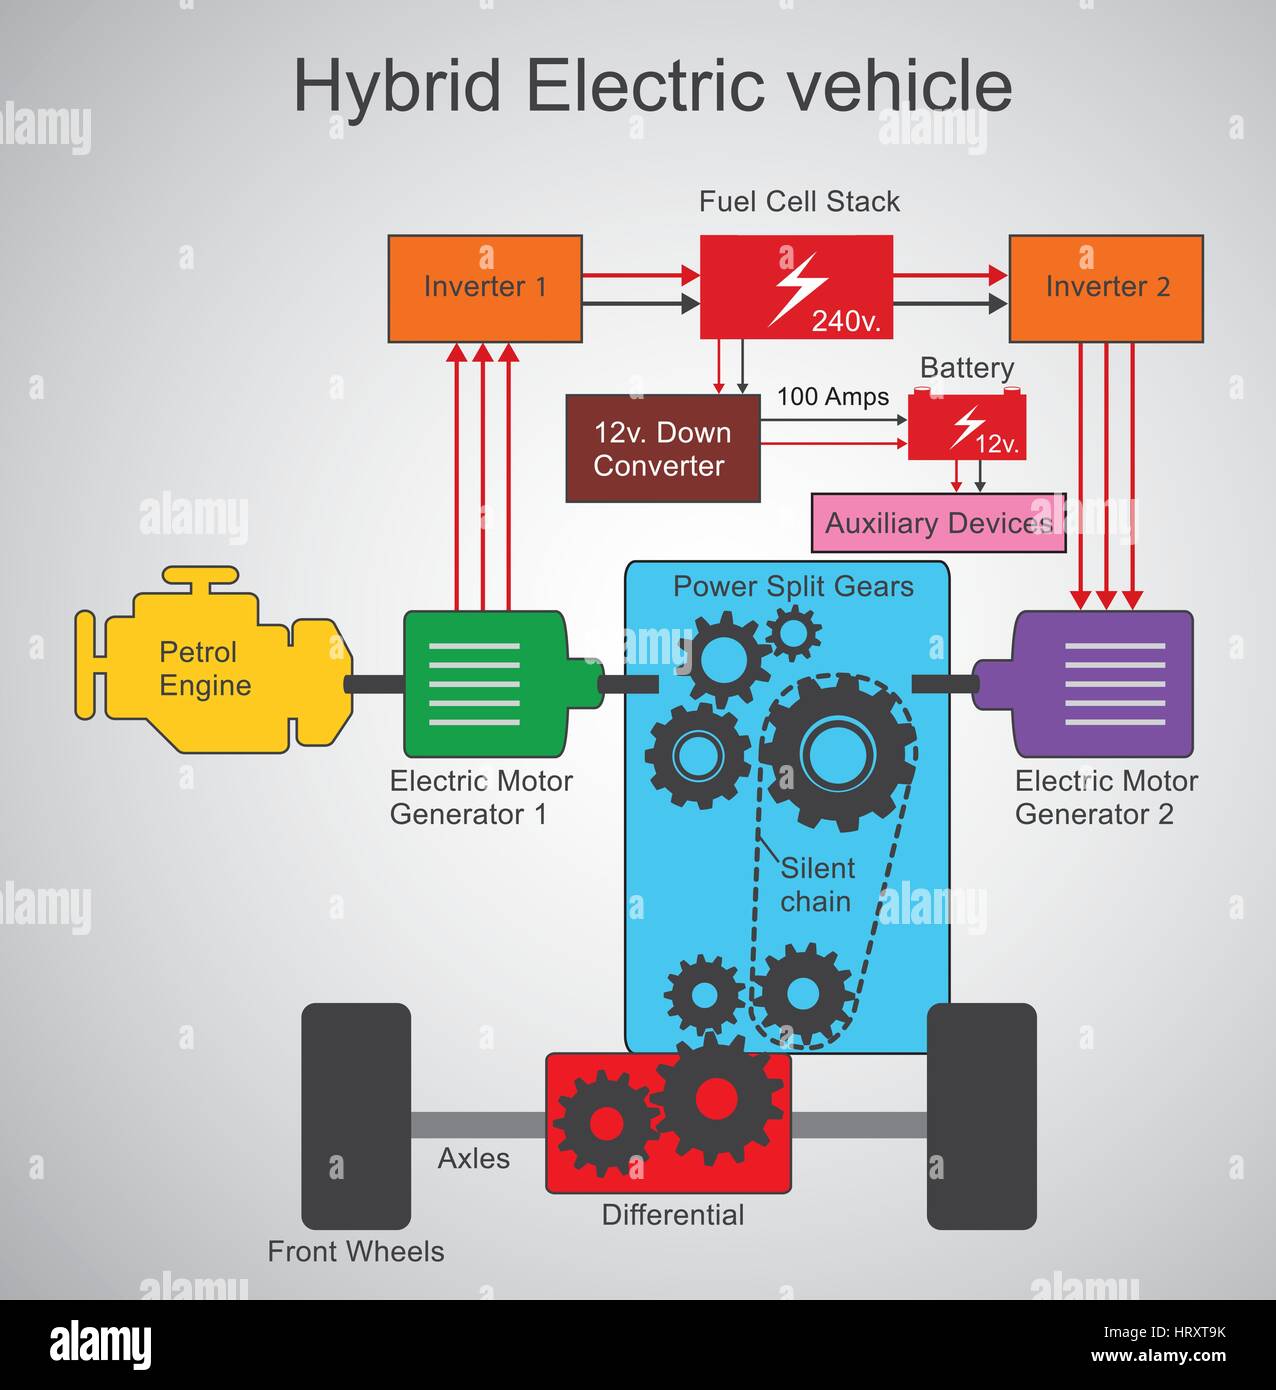 Hybrid Electric vehicle. Hybrid electric vehicle (HEV) is a type of hybrid vehicle and electric vehicle that combines a conventional internal combus Stock Vector